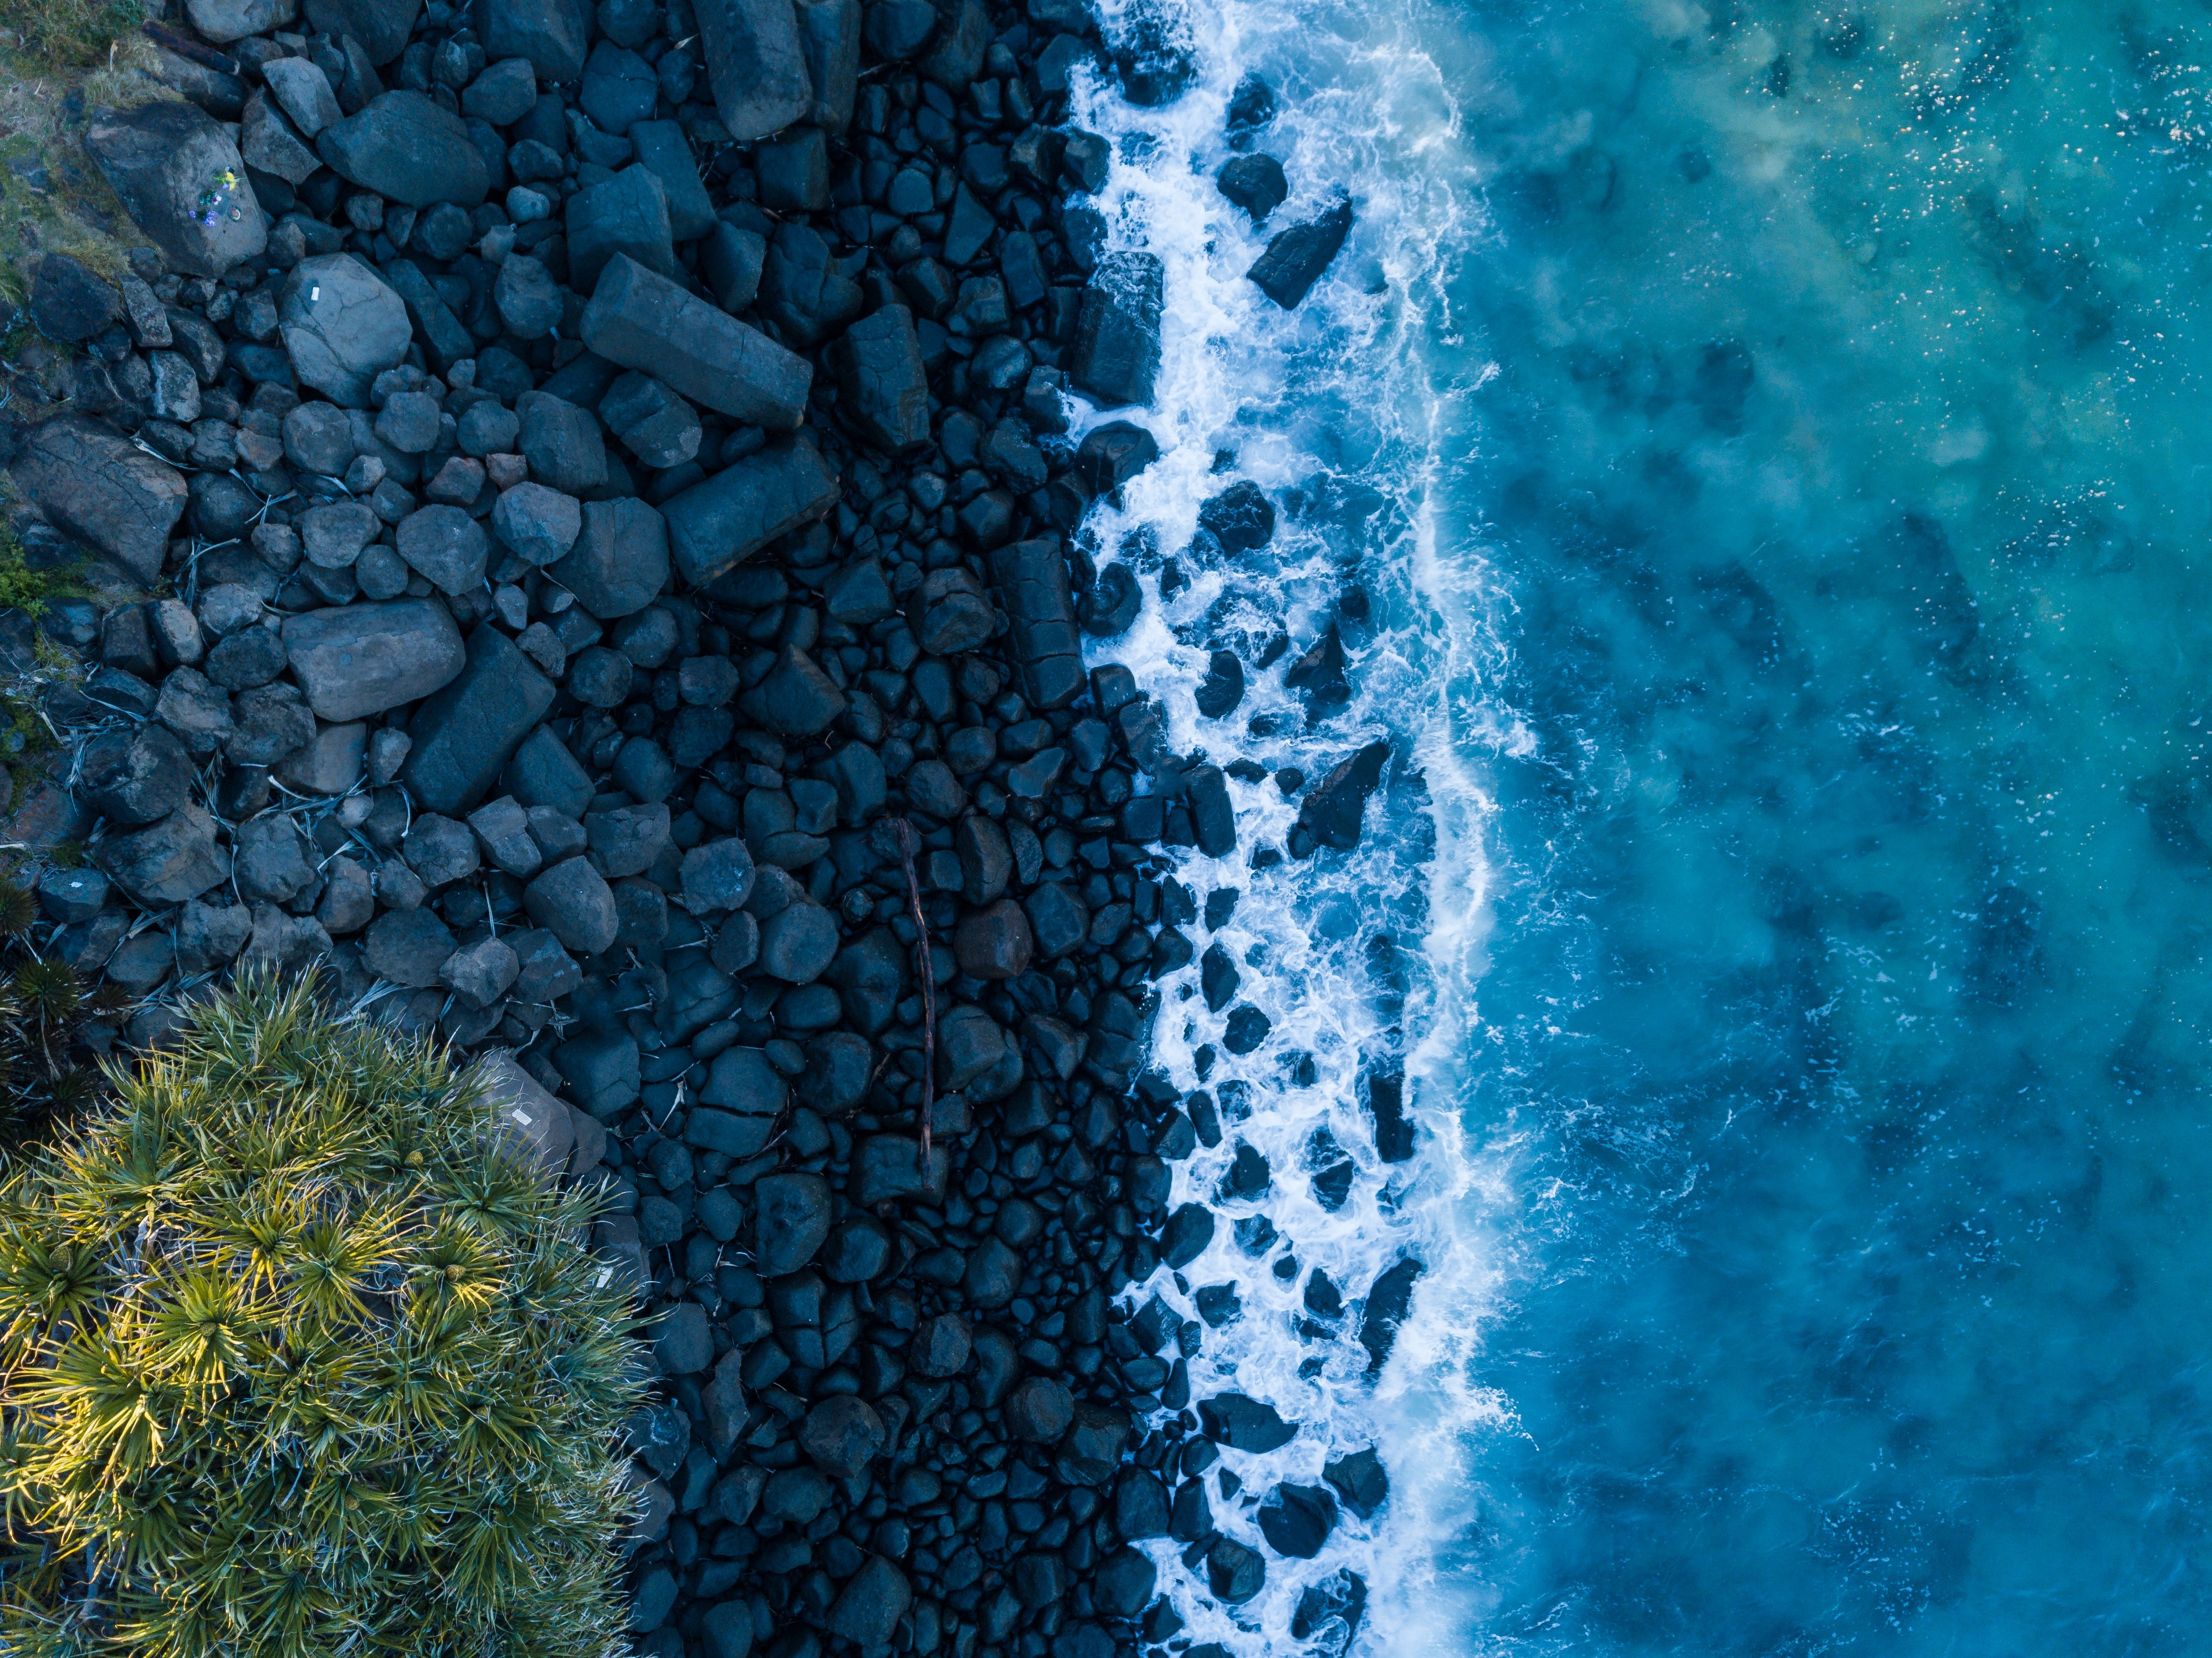 view from above, ocean, nature, stones, shore, bank, surf